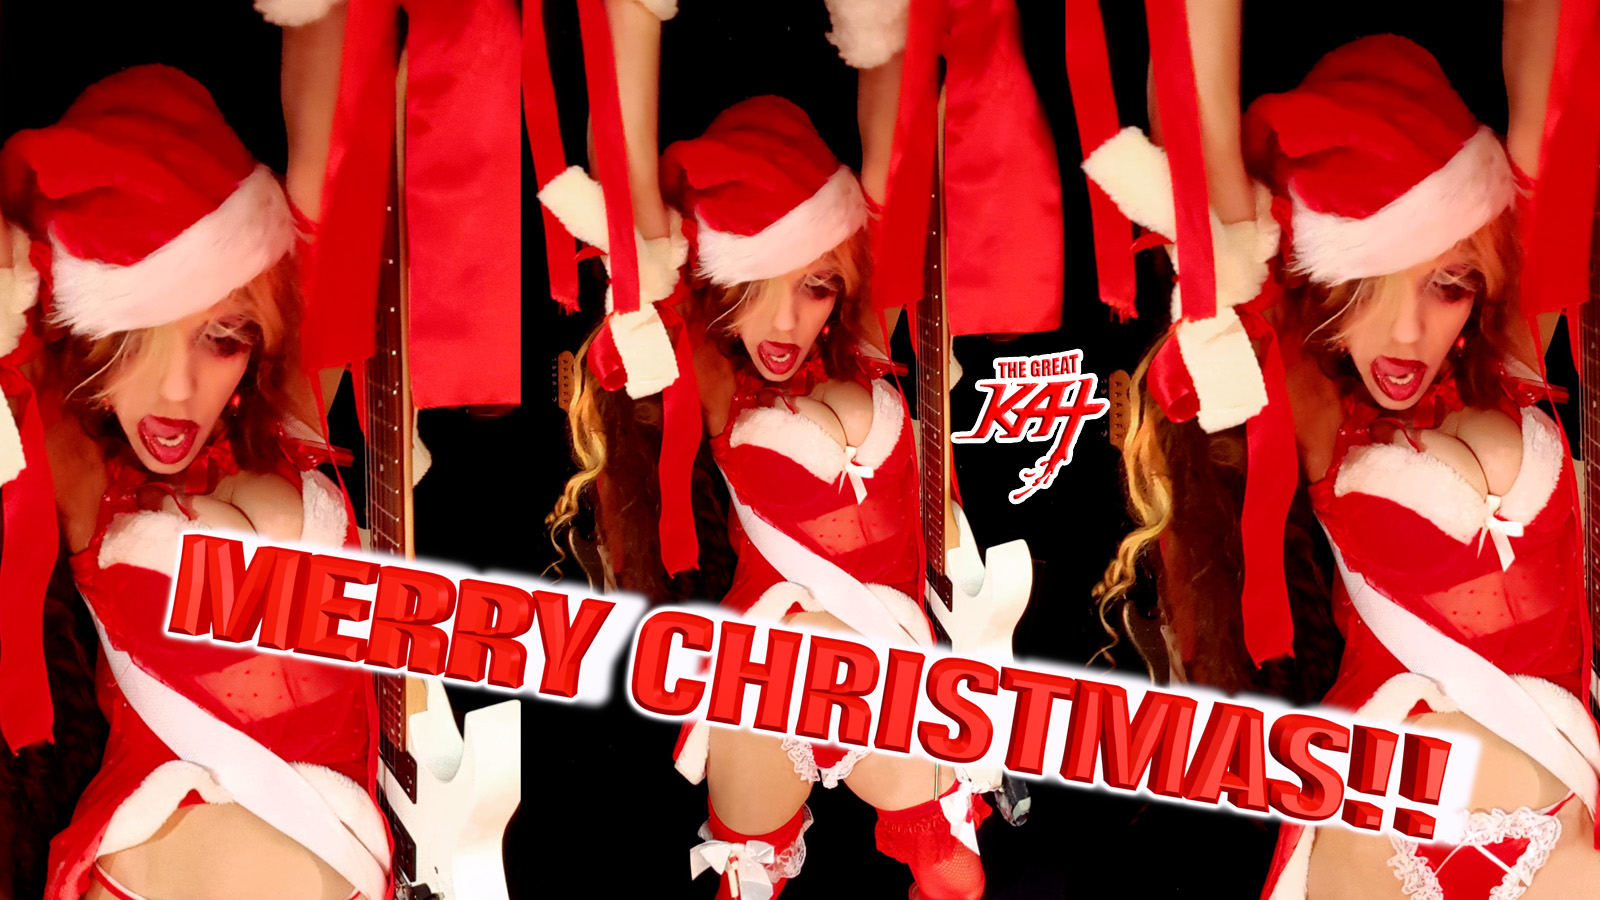 THE GREAT KAT'S "TOP 20 HOT SHRED HOLIDAYS!" "MERRY CHRISTMAS!!" From The Great Kat's NEW DVD!!!!